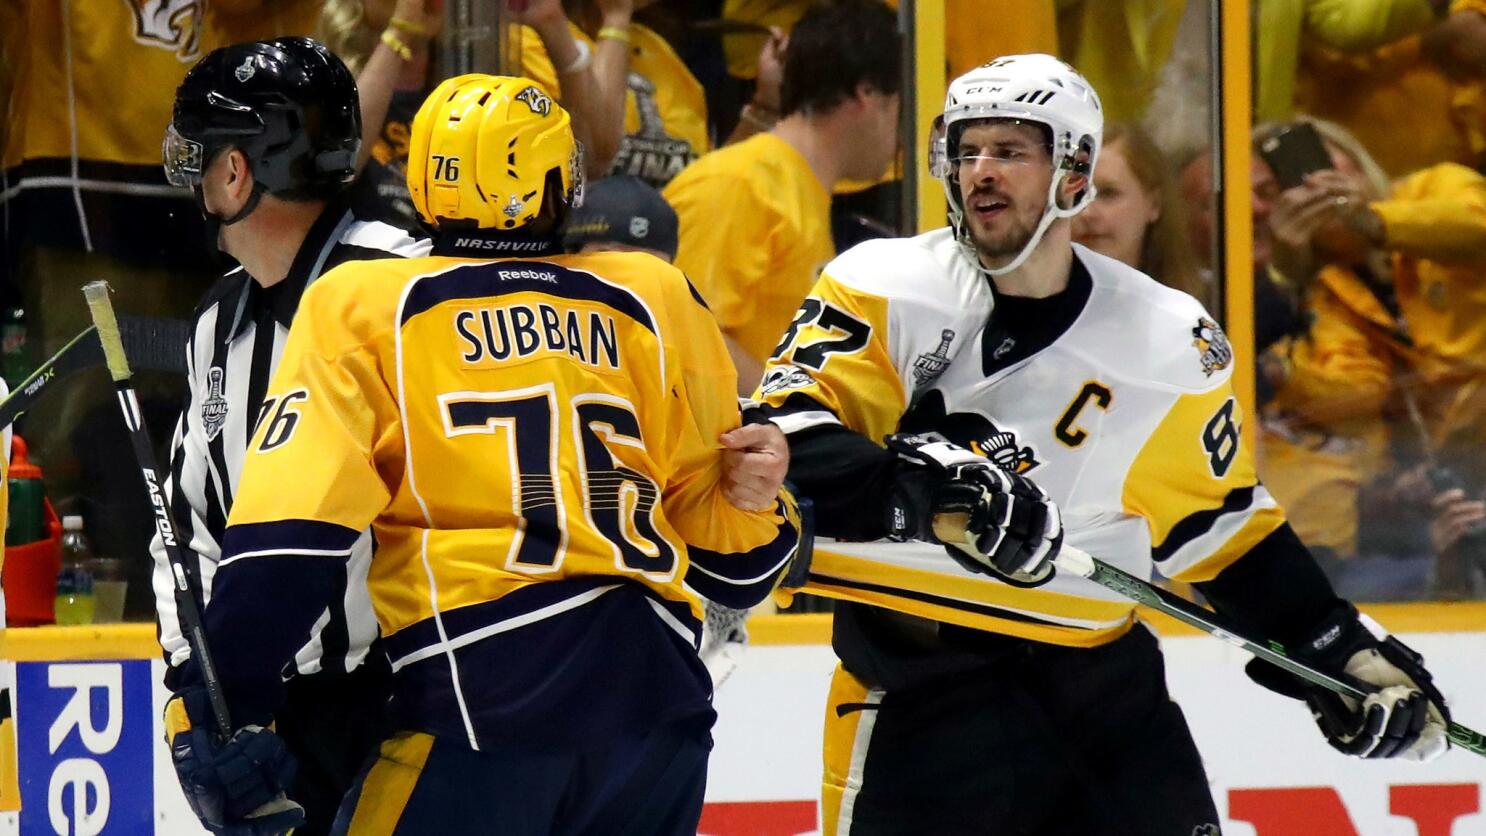 P.K. Subban: Firing shots on and off the ice